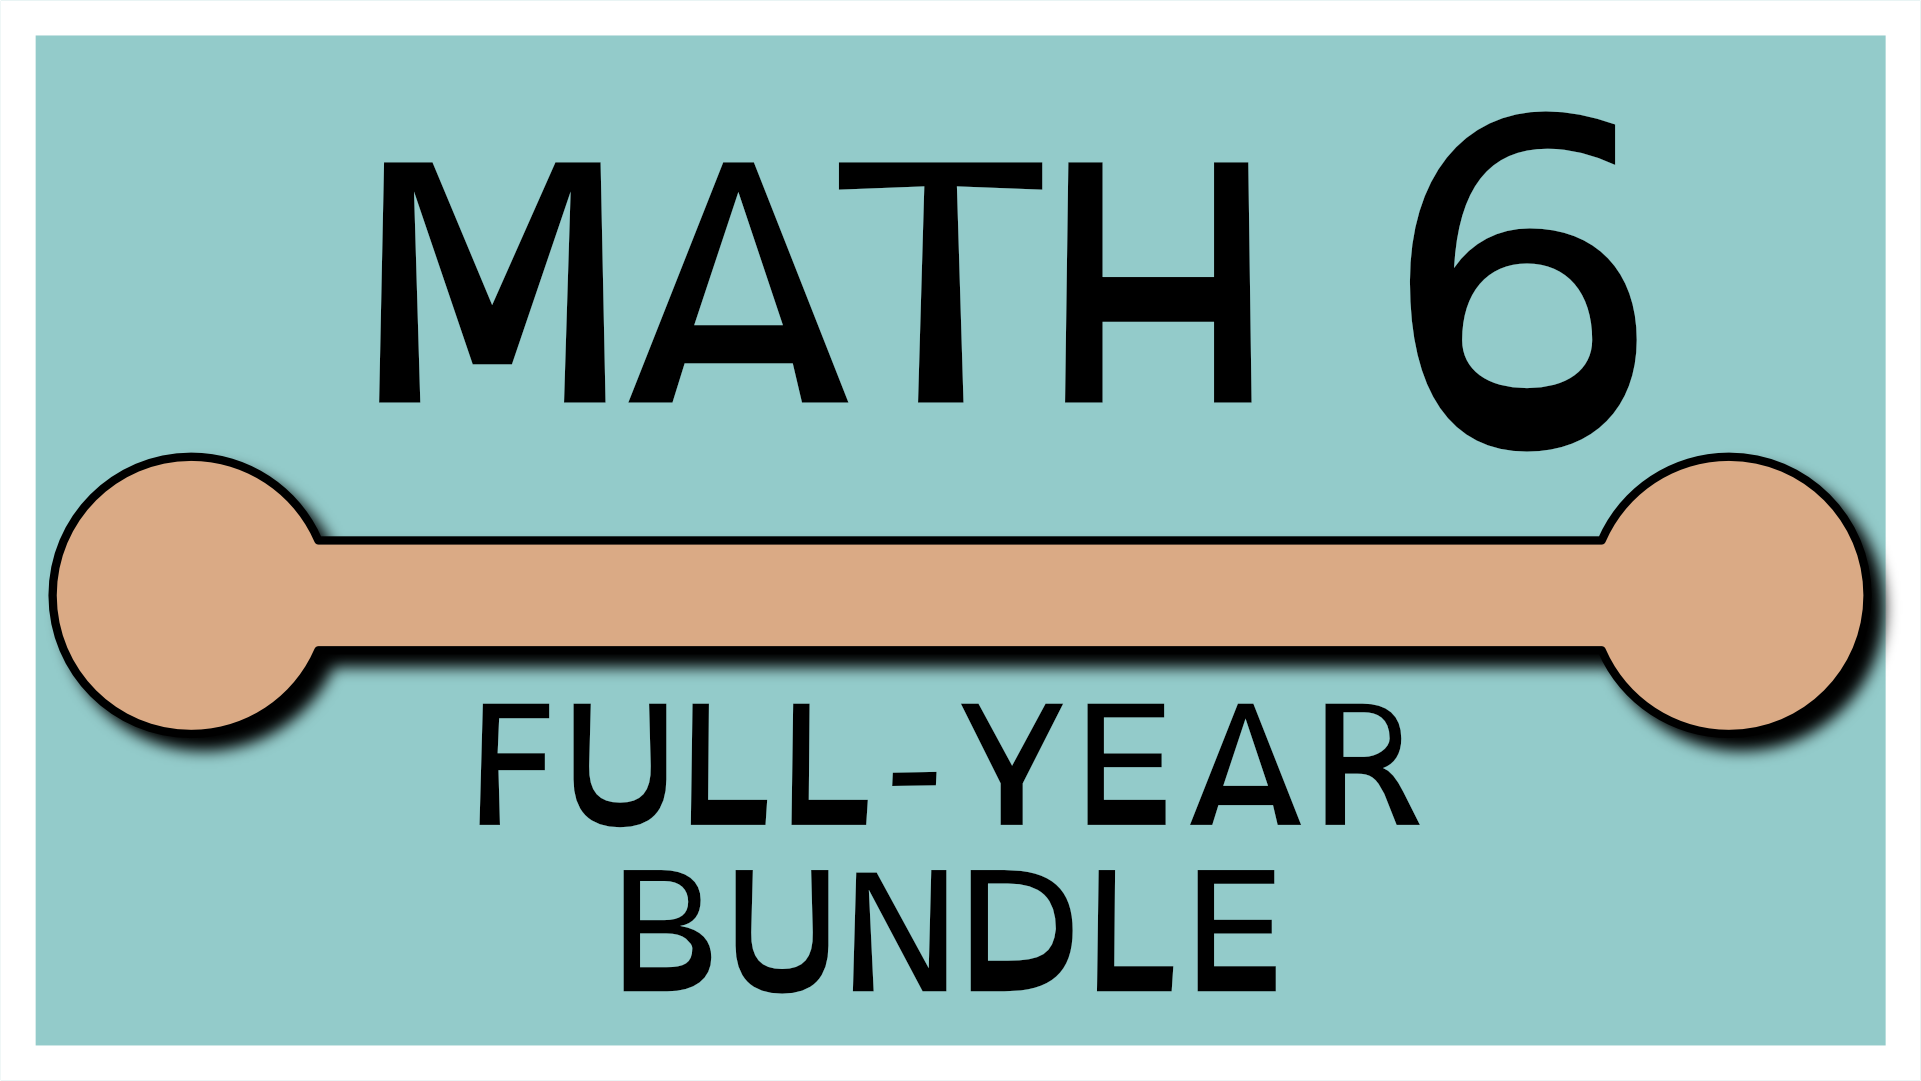 &quot;Math 6 Full-Year Bundle&quot; text over a line